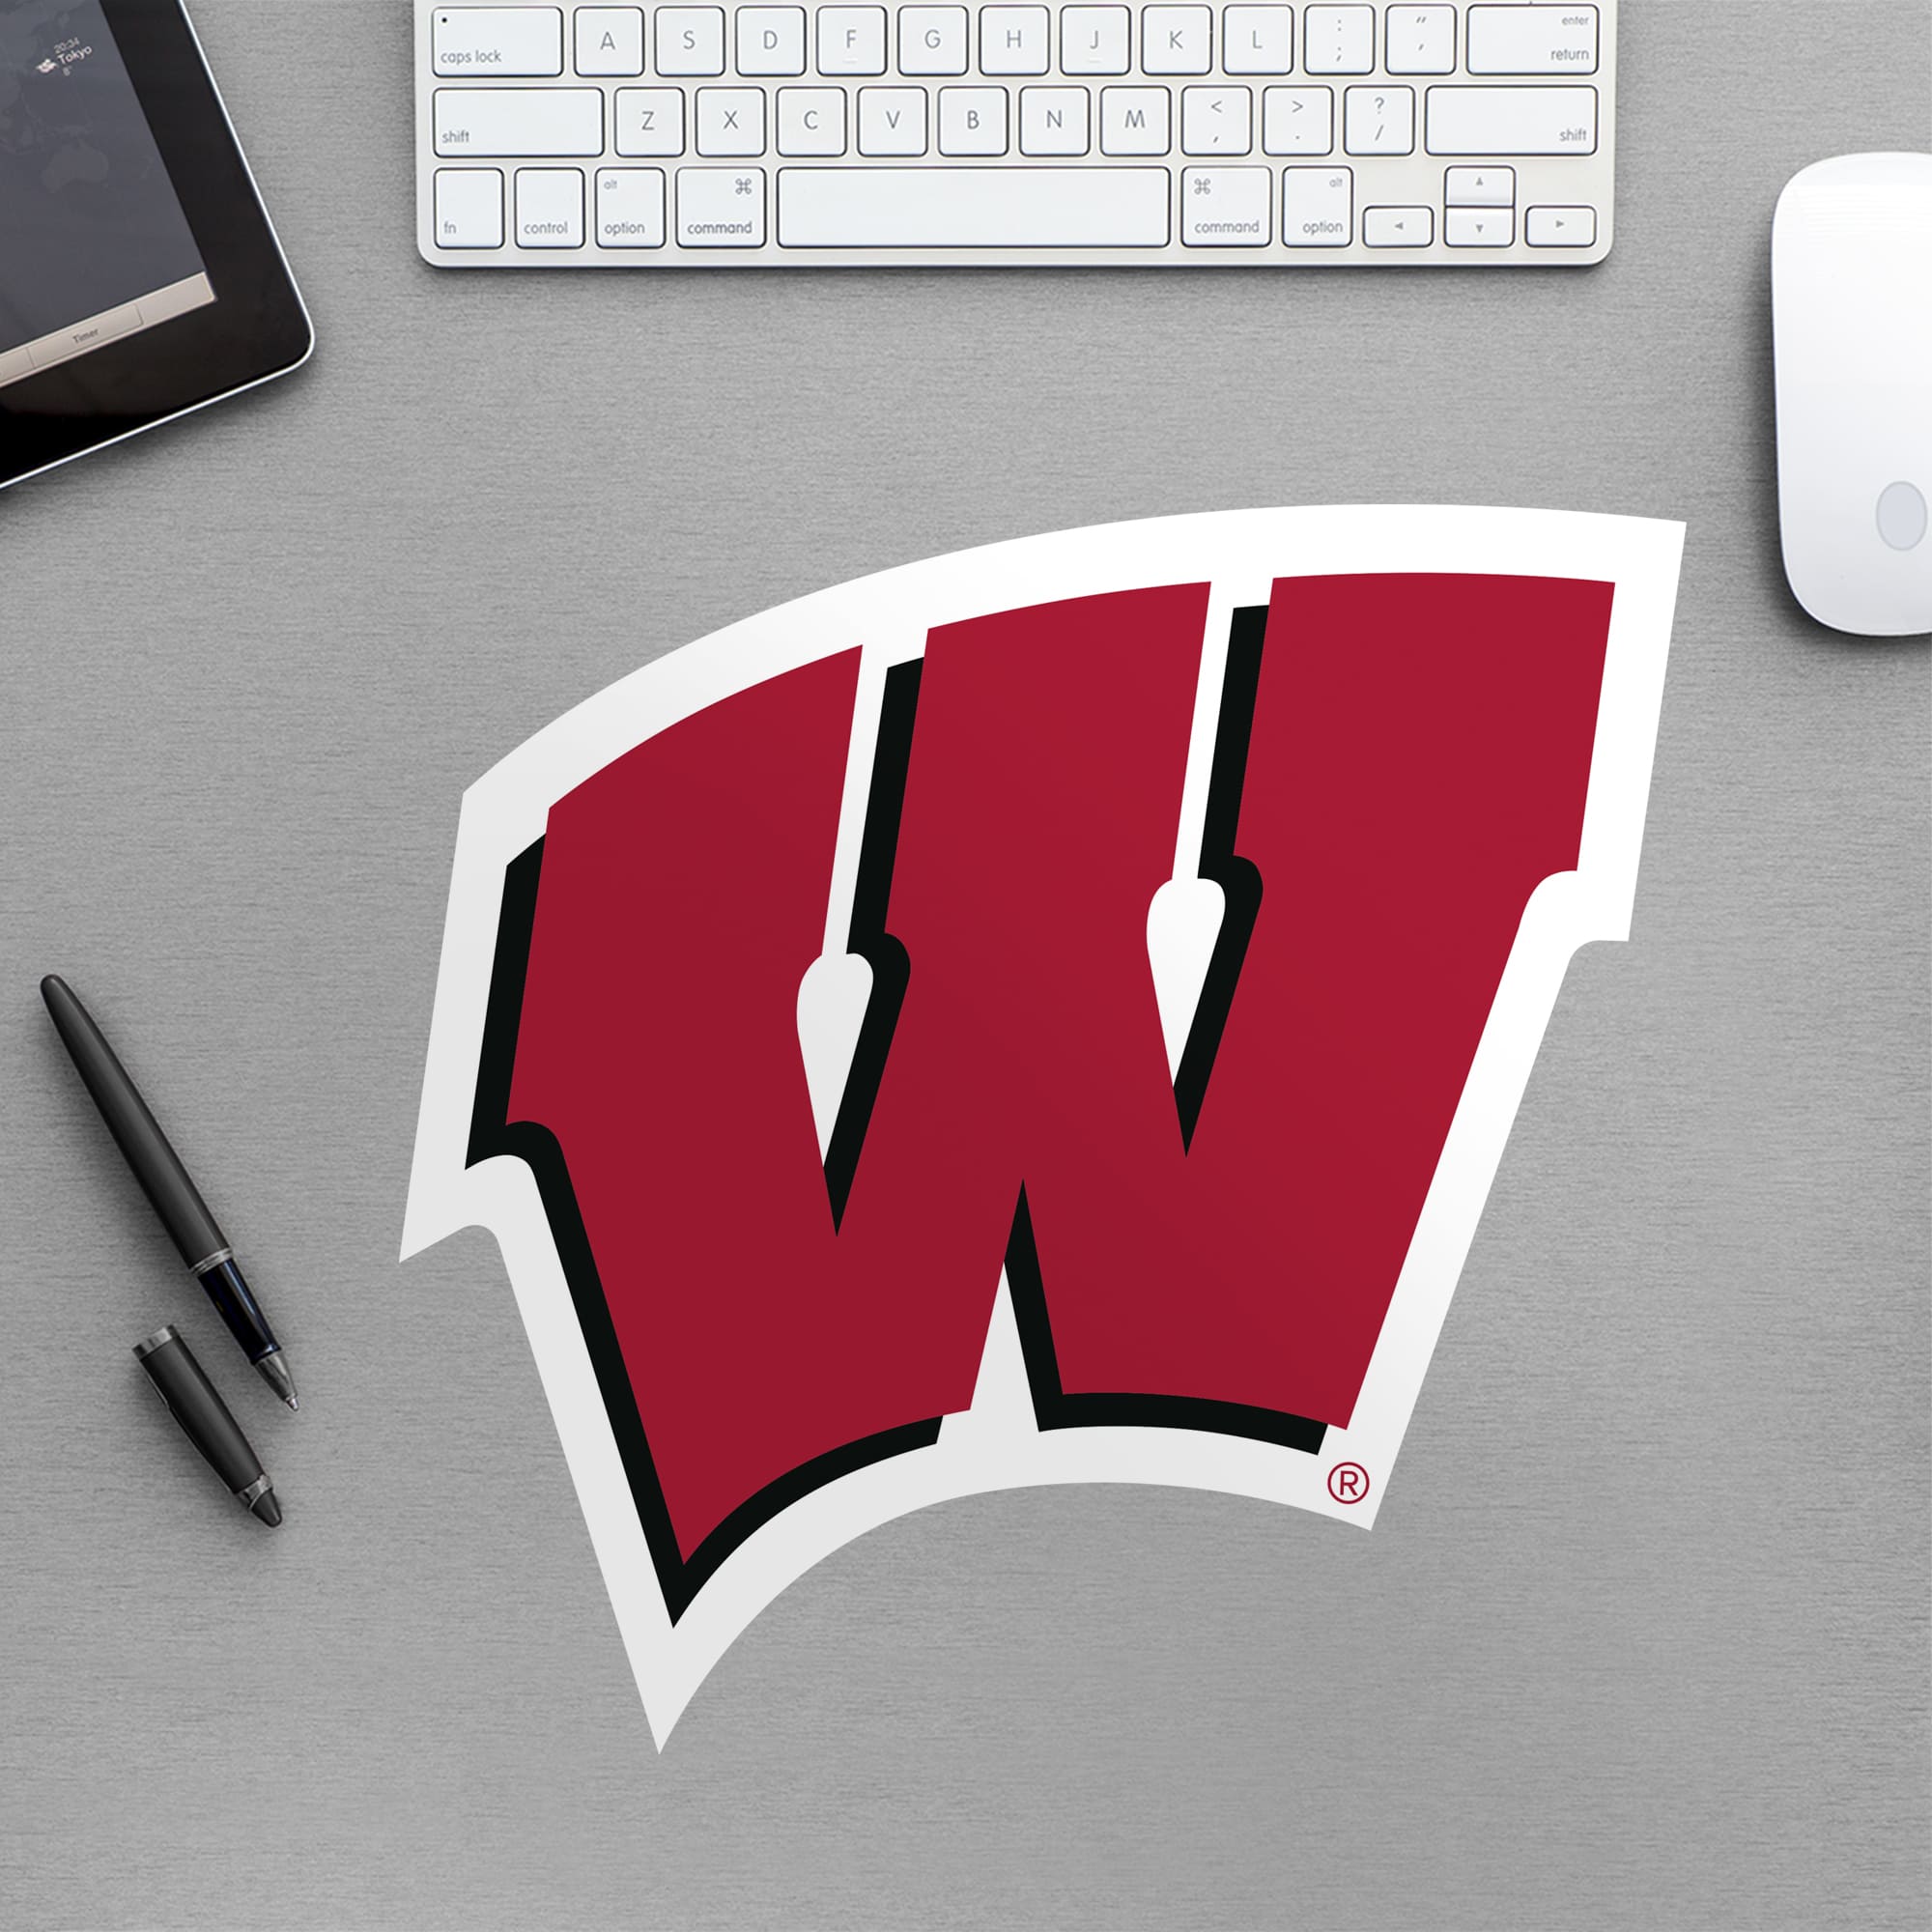 Wisconsin Badgers: Logo - Officially Licensed Removable Wall Decal Large by Fathead | Vinyl